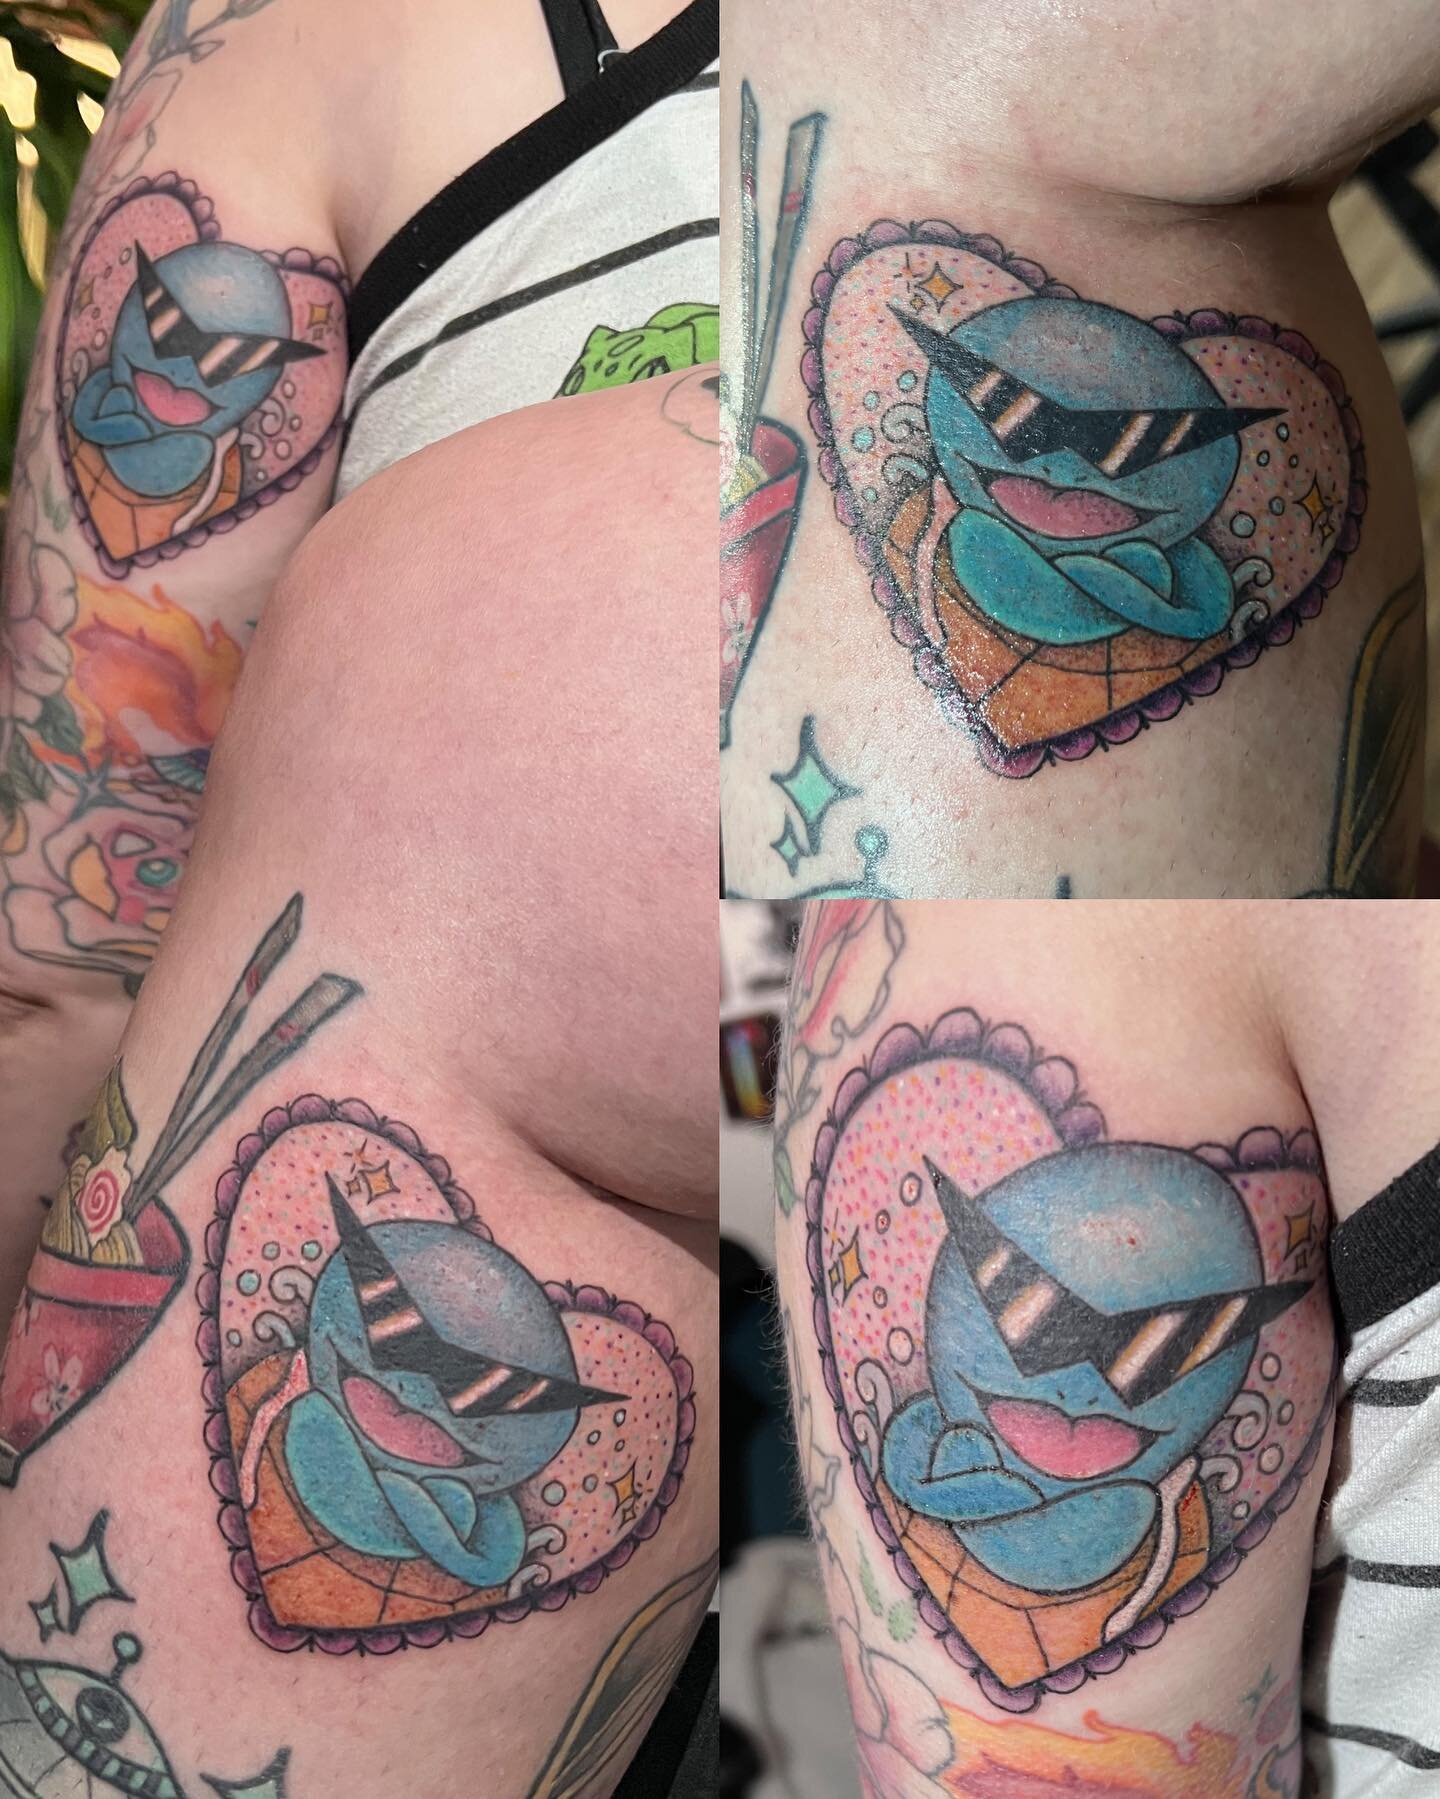 my new squirtle squad tattoo i just thought id share   rpokemon